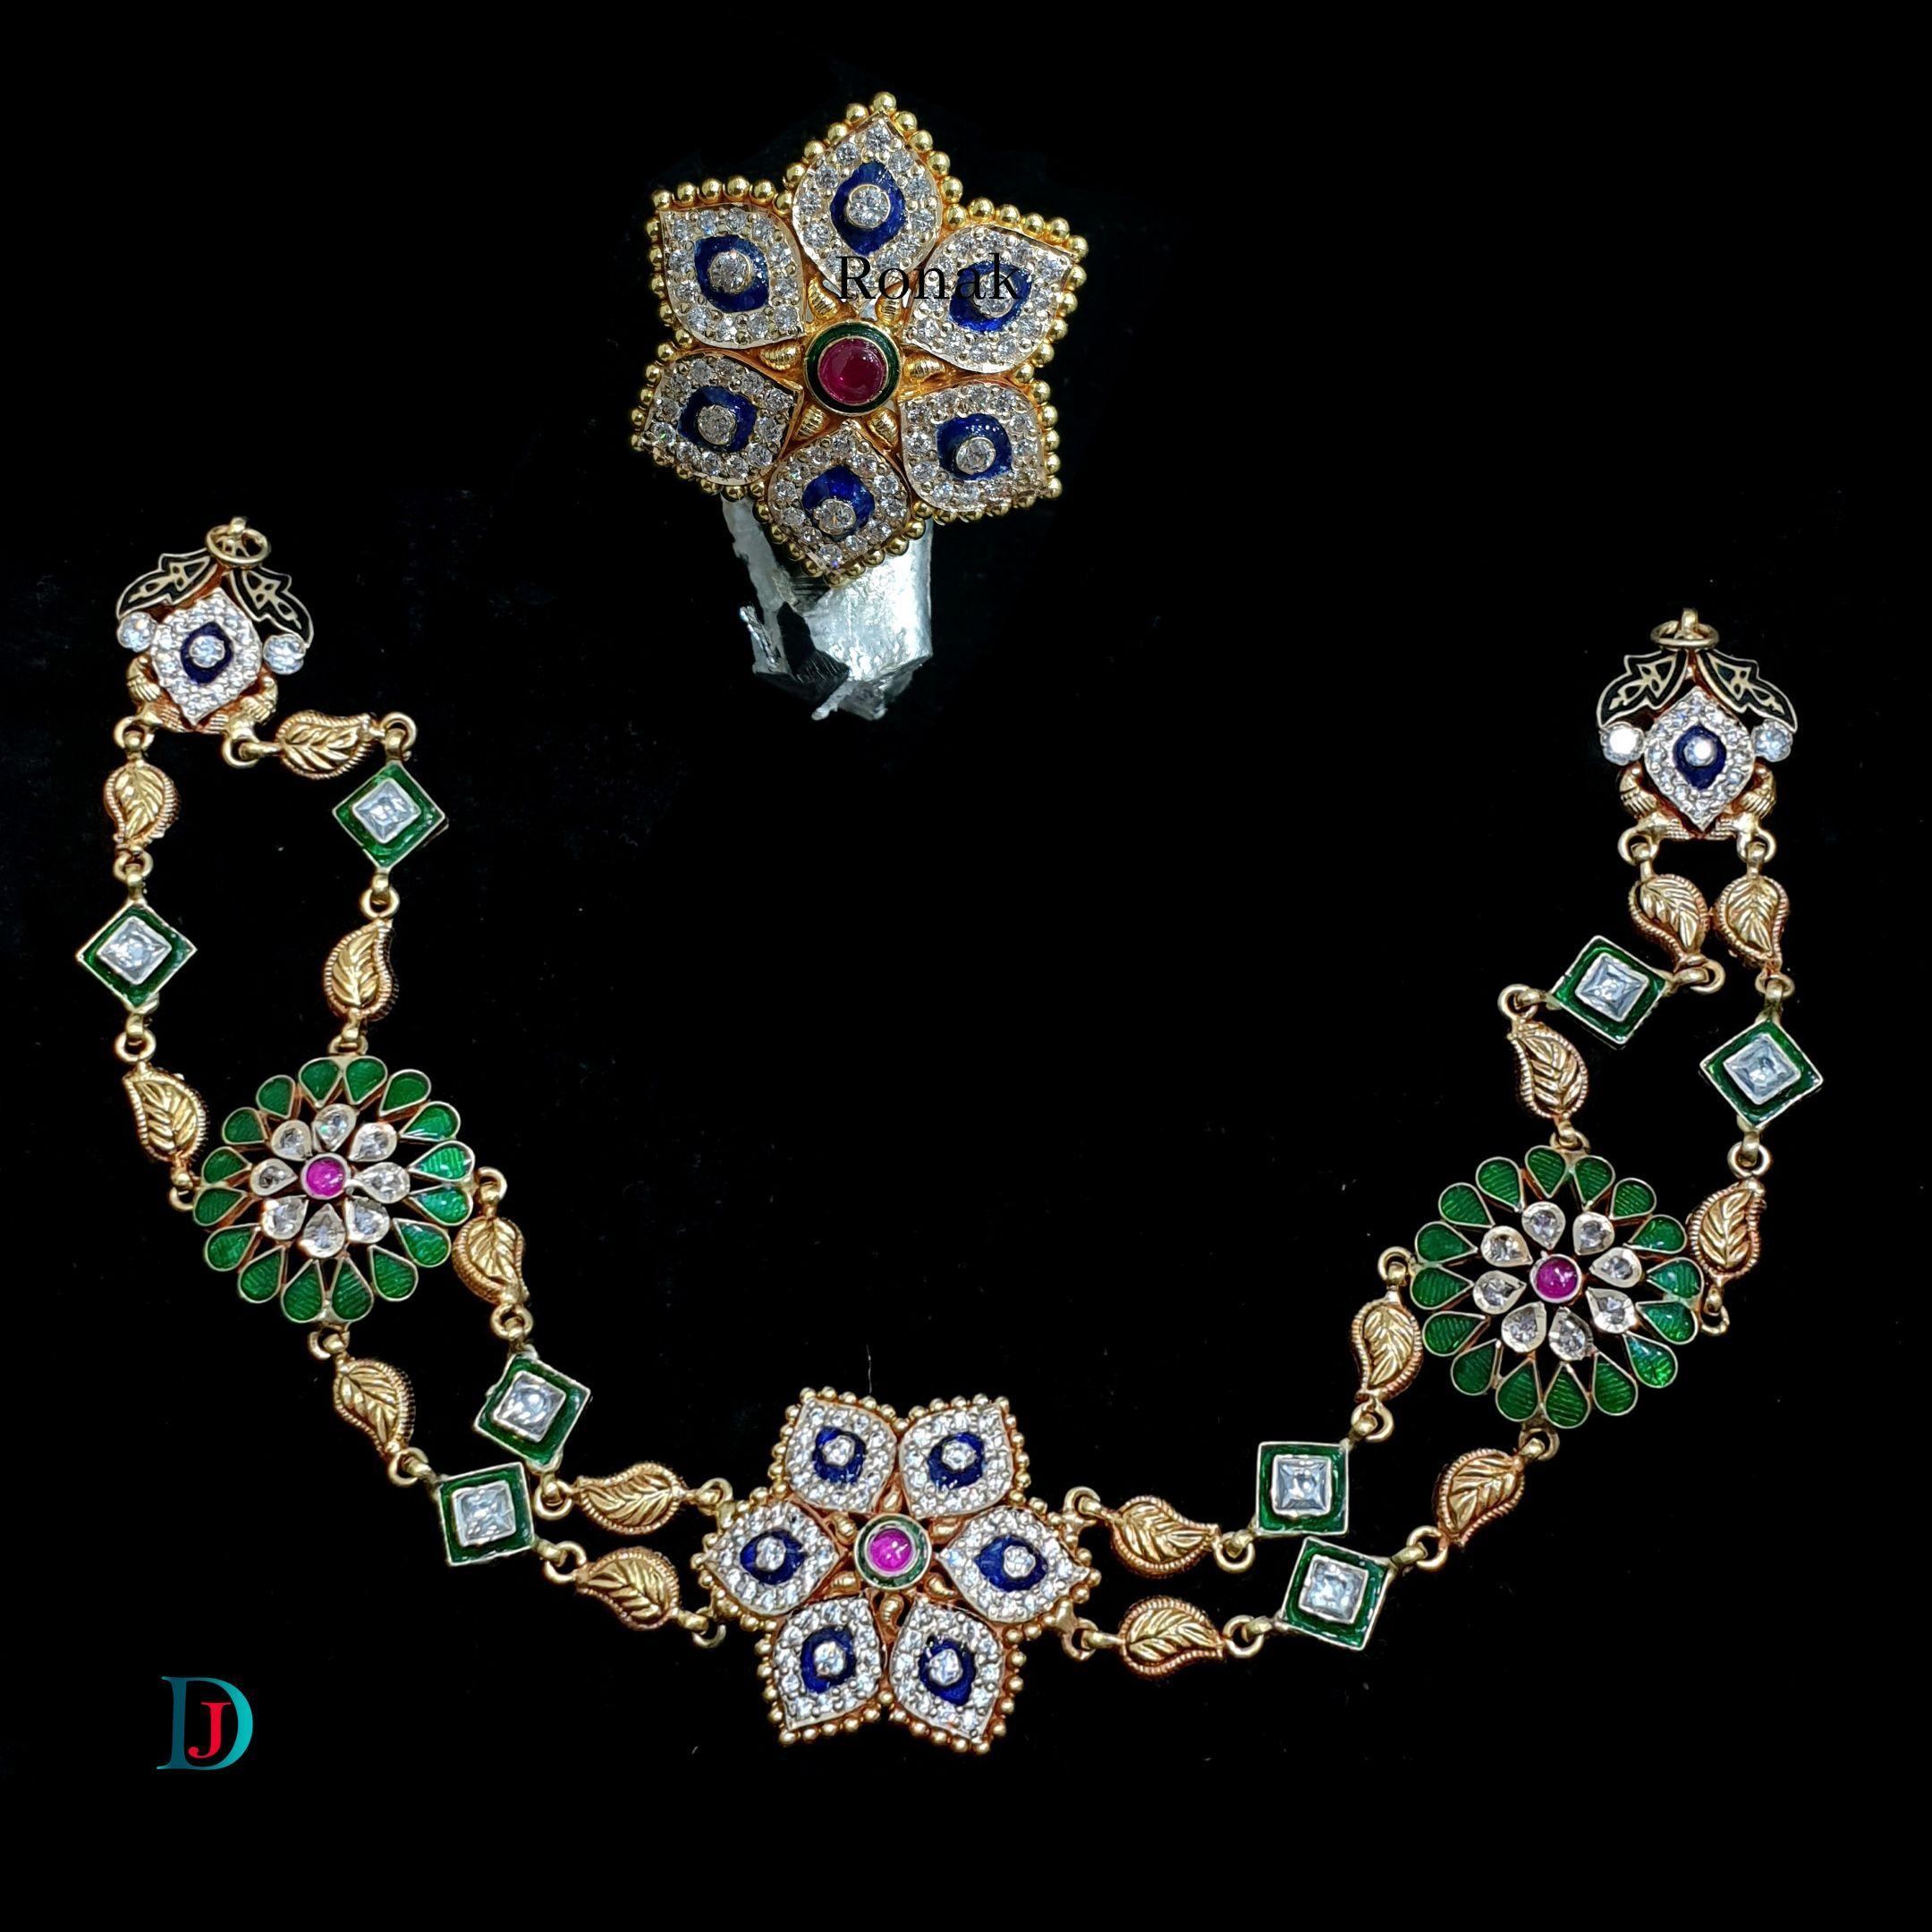 New and Latest Design of Desi Indian Rajasthani Gold Sheeshphool 